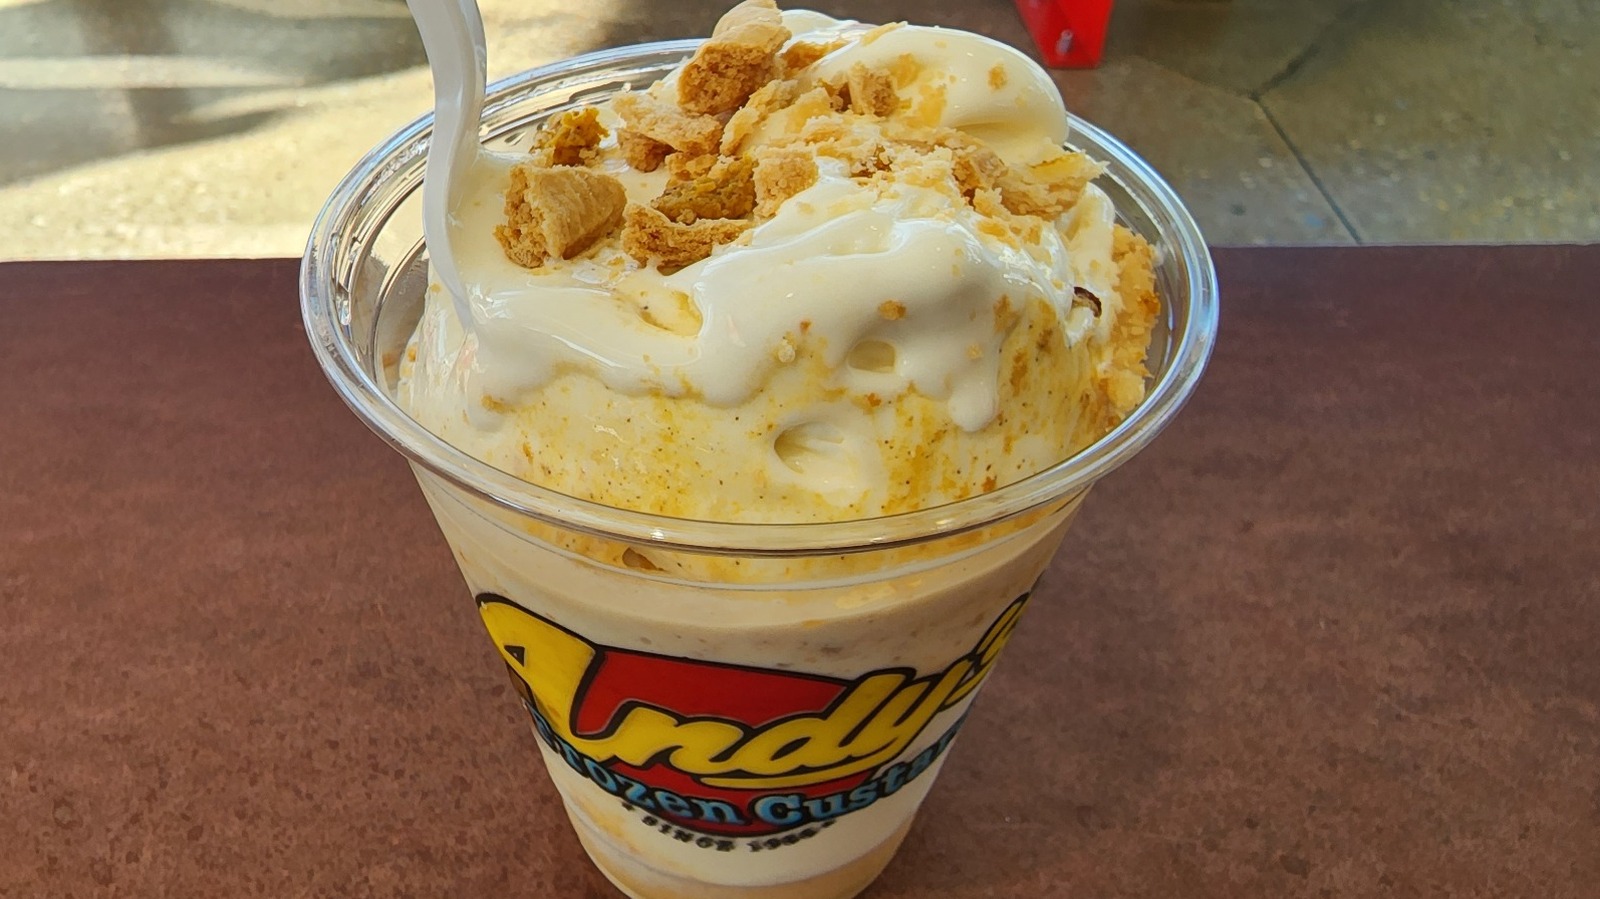 We Tried The New Pumpkin Pie Concrete From Andy's Frozen Custard. Here